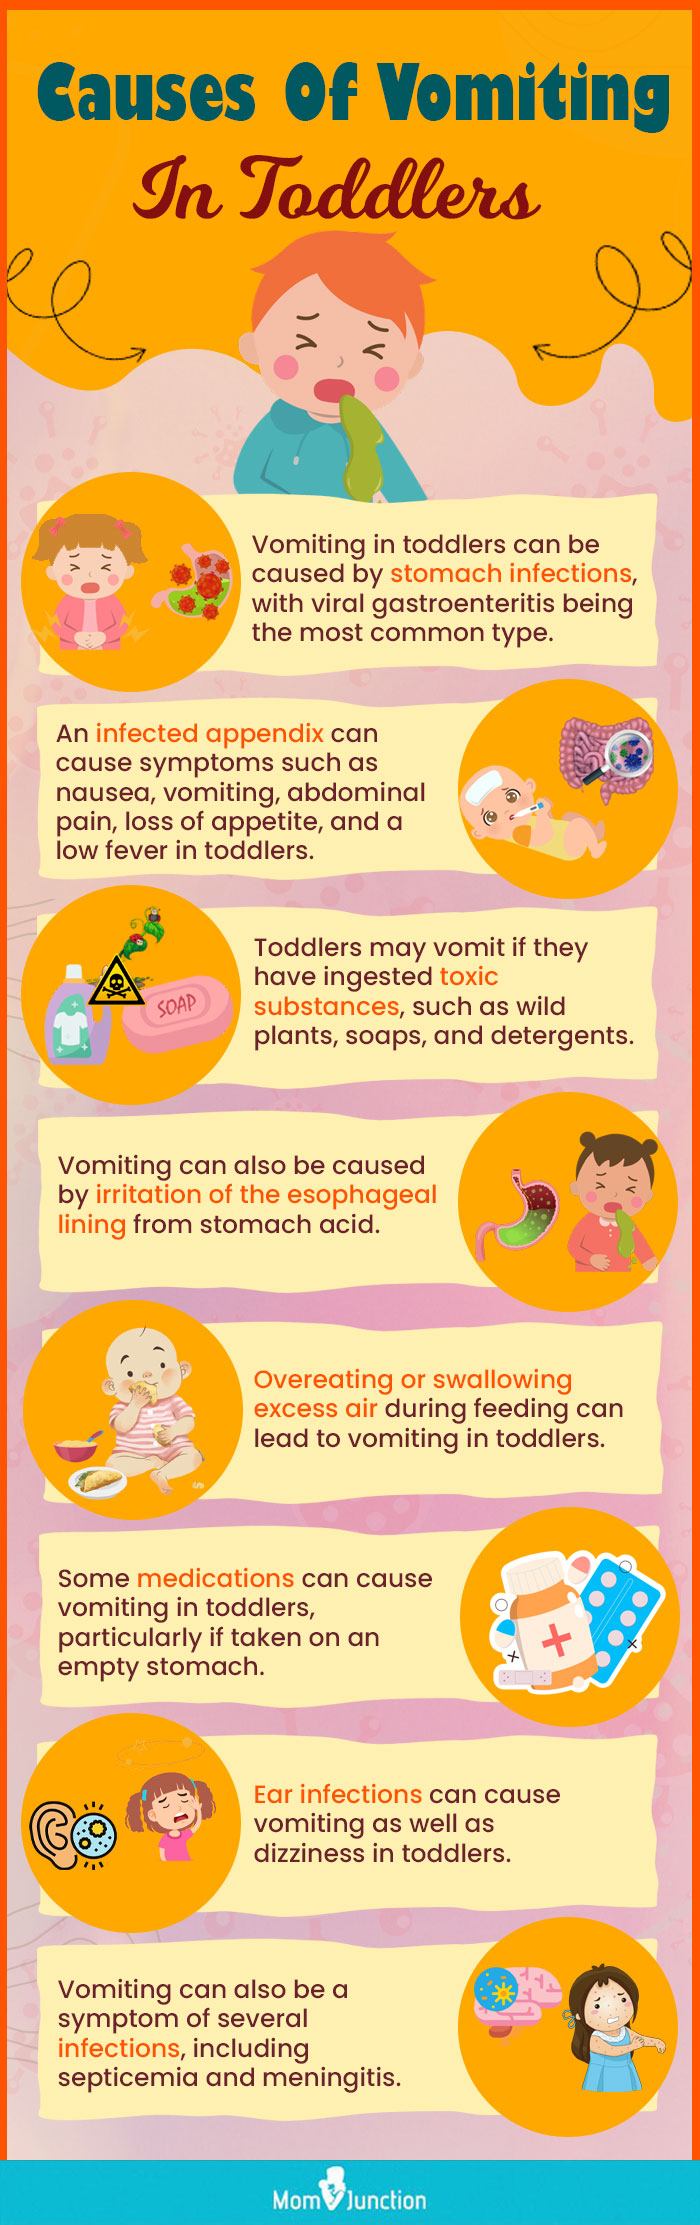 causes of vomiting in toddlers [infographic]